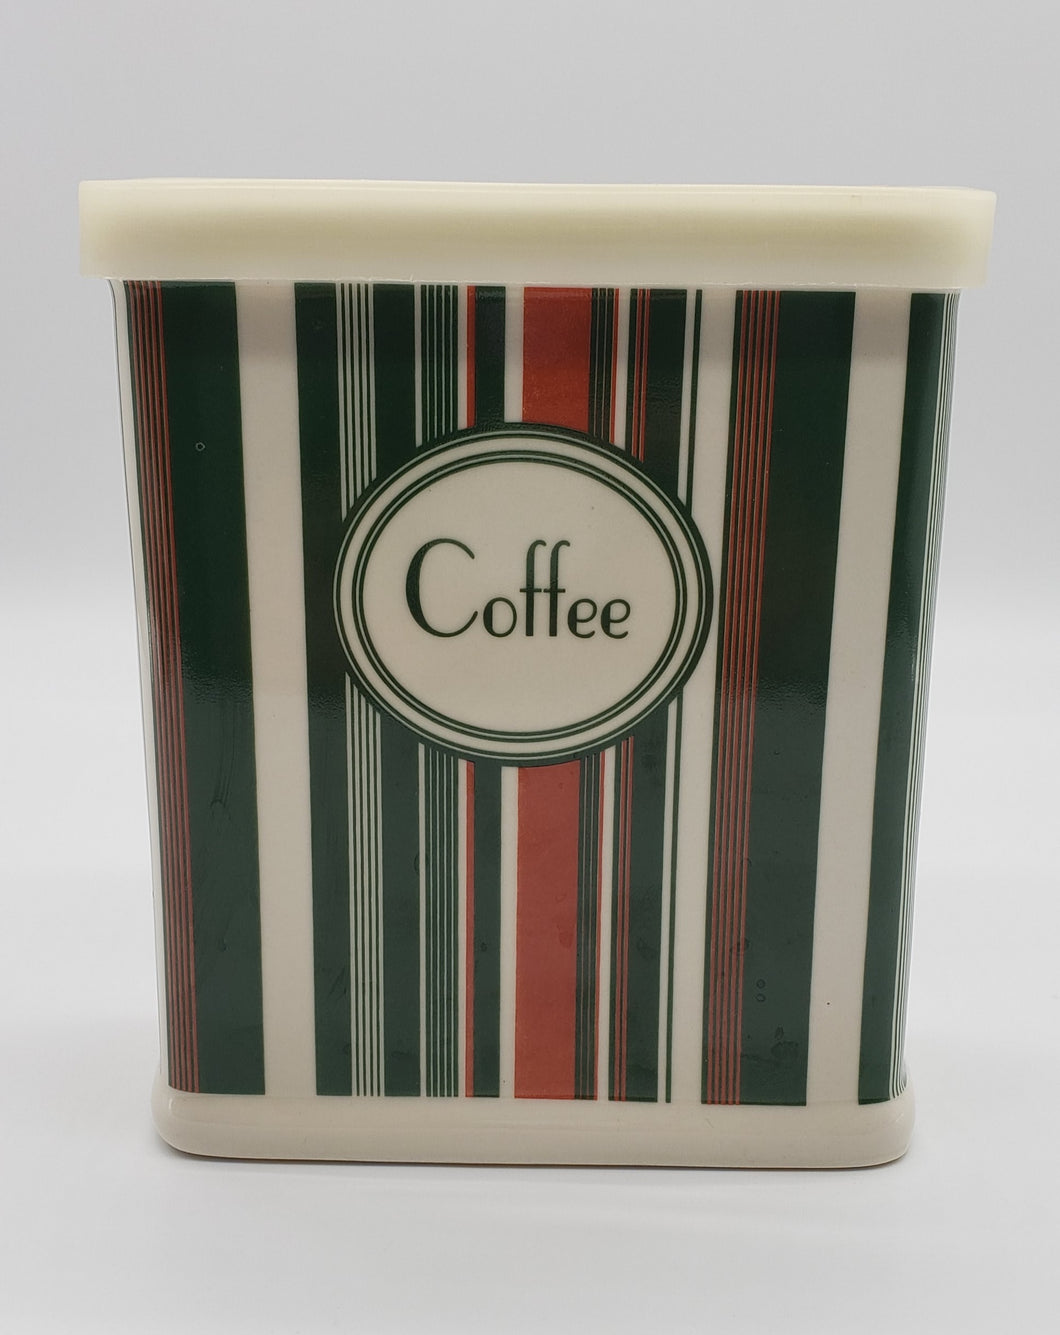 California Pantry Classic Ceramics Coffee Canister with Lid